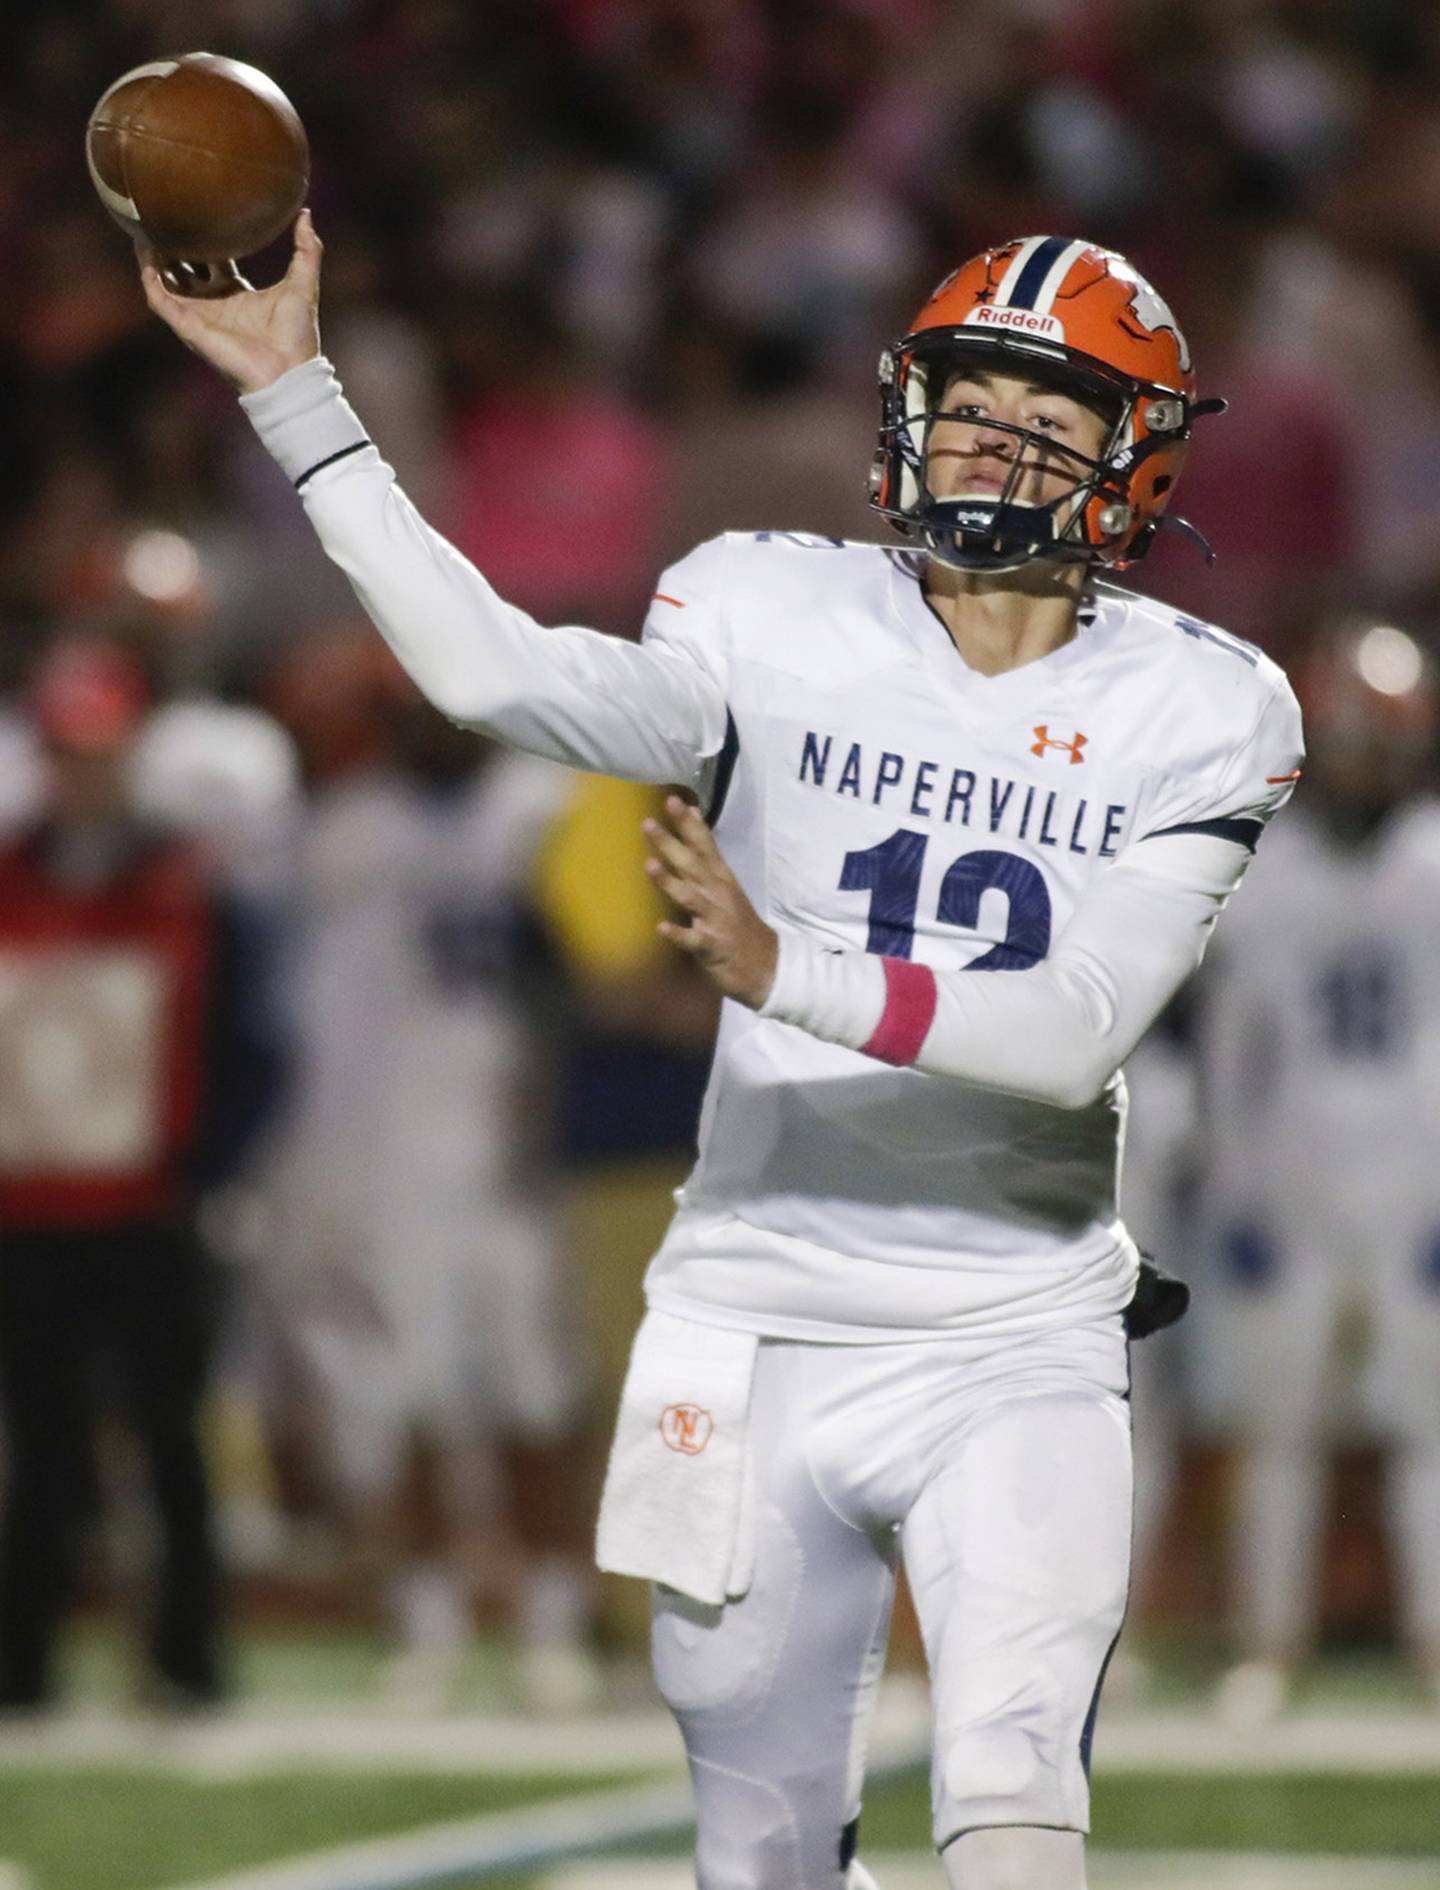 Naperville North quarterback Aidan Gray passes the ball against Naperville Central during a DuPage Valley Conference game in Naperville on Thursday, Oct. 20, 2022.